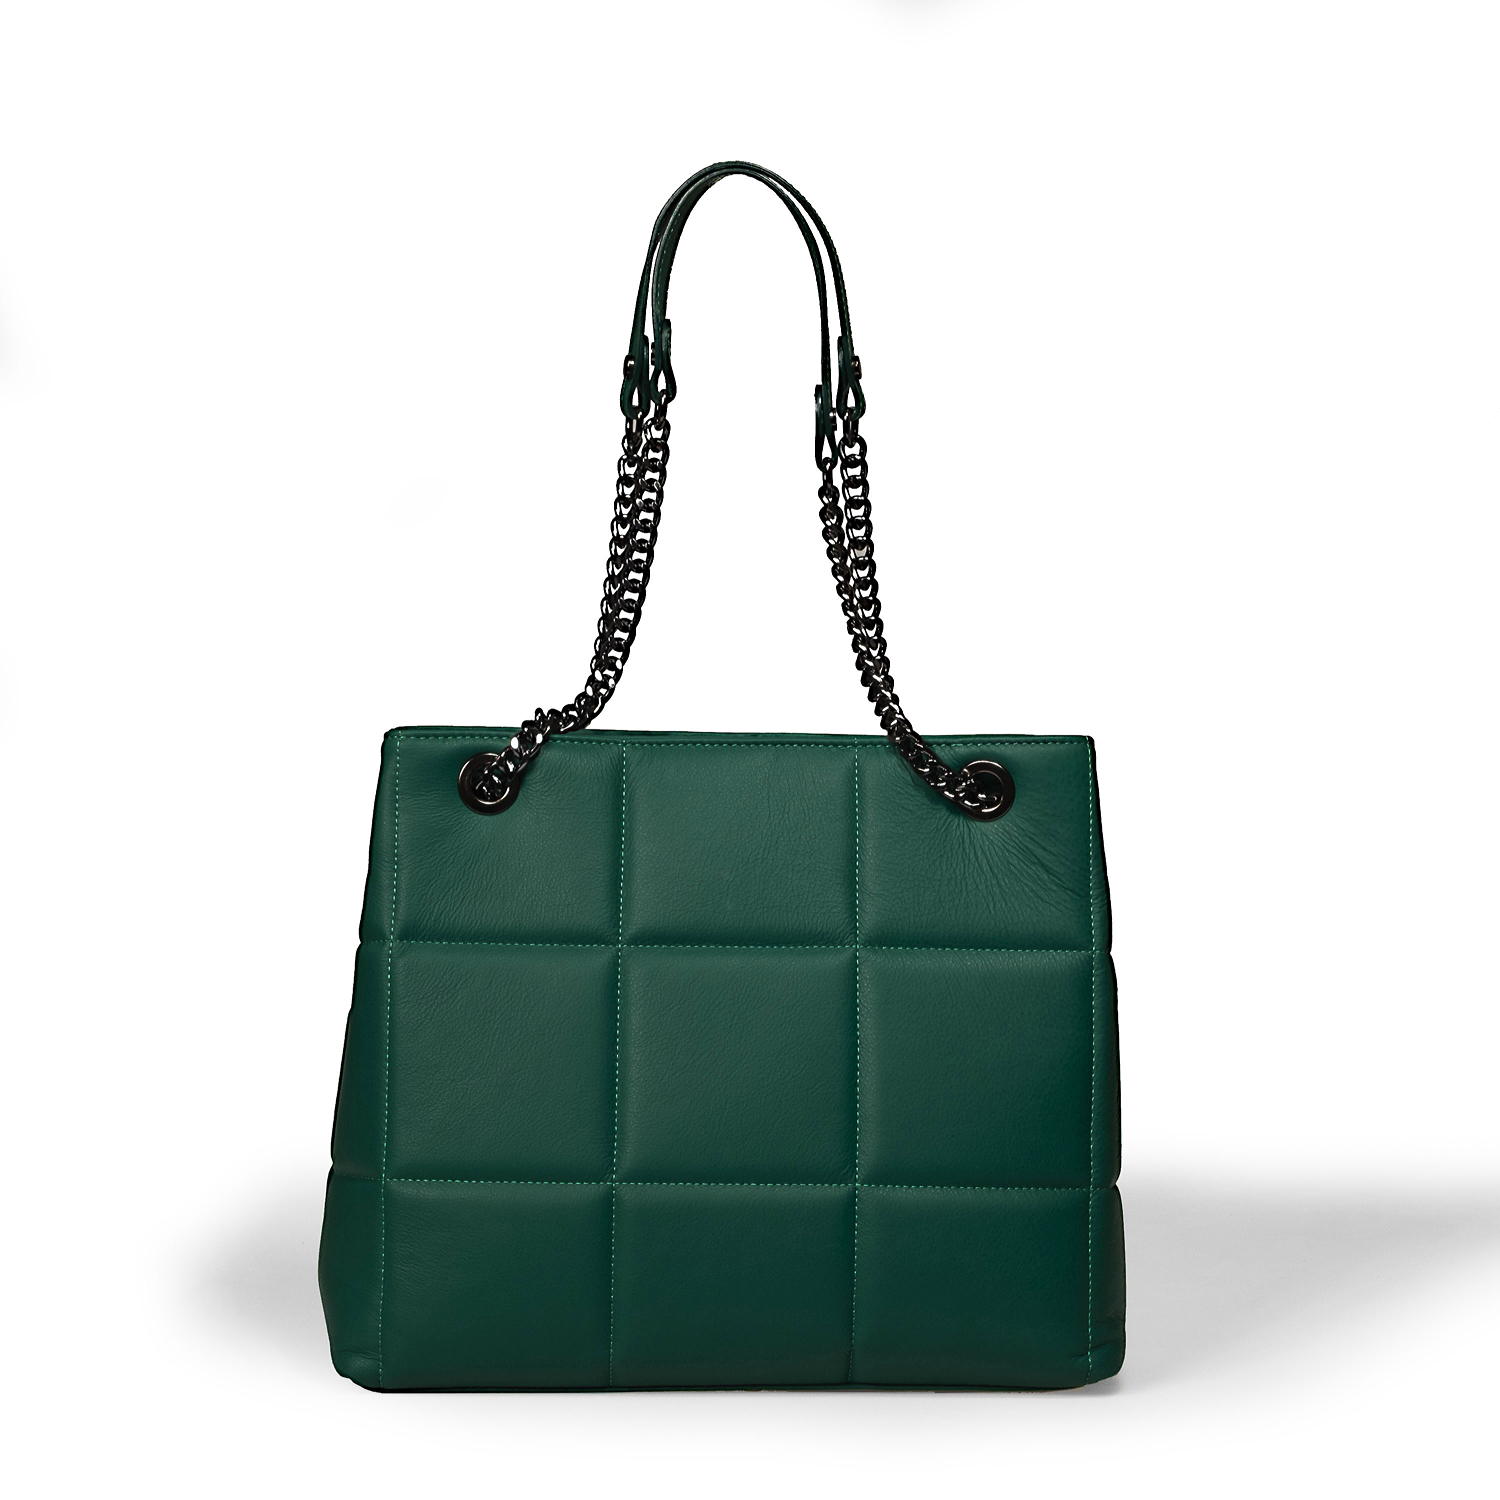 LC901bG QUILTED SHOULDER BAG - BELLINIBORSE.COM | MADE IN ITALY